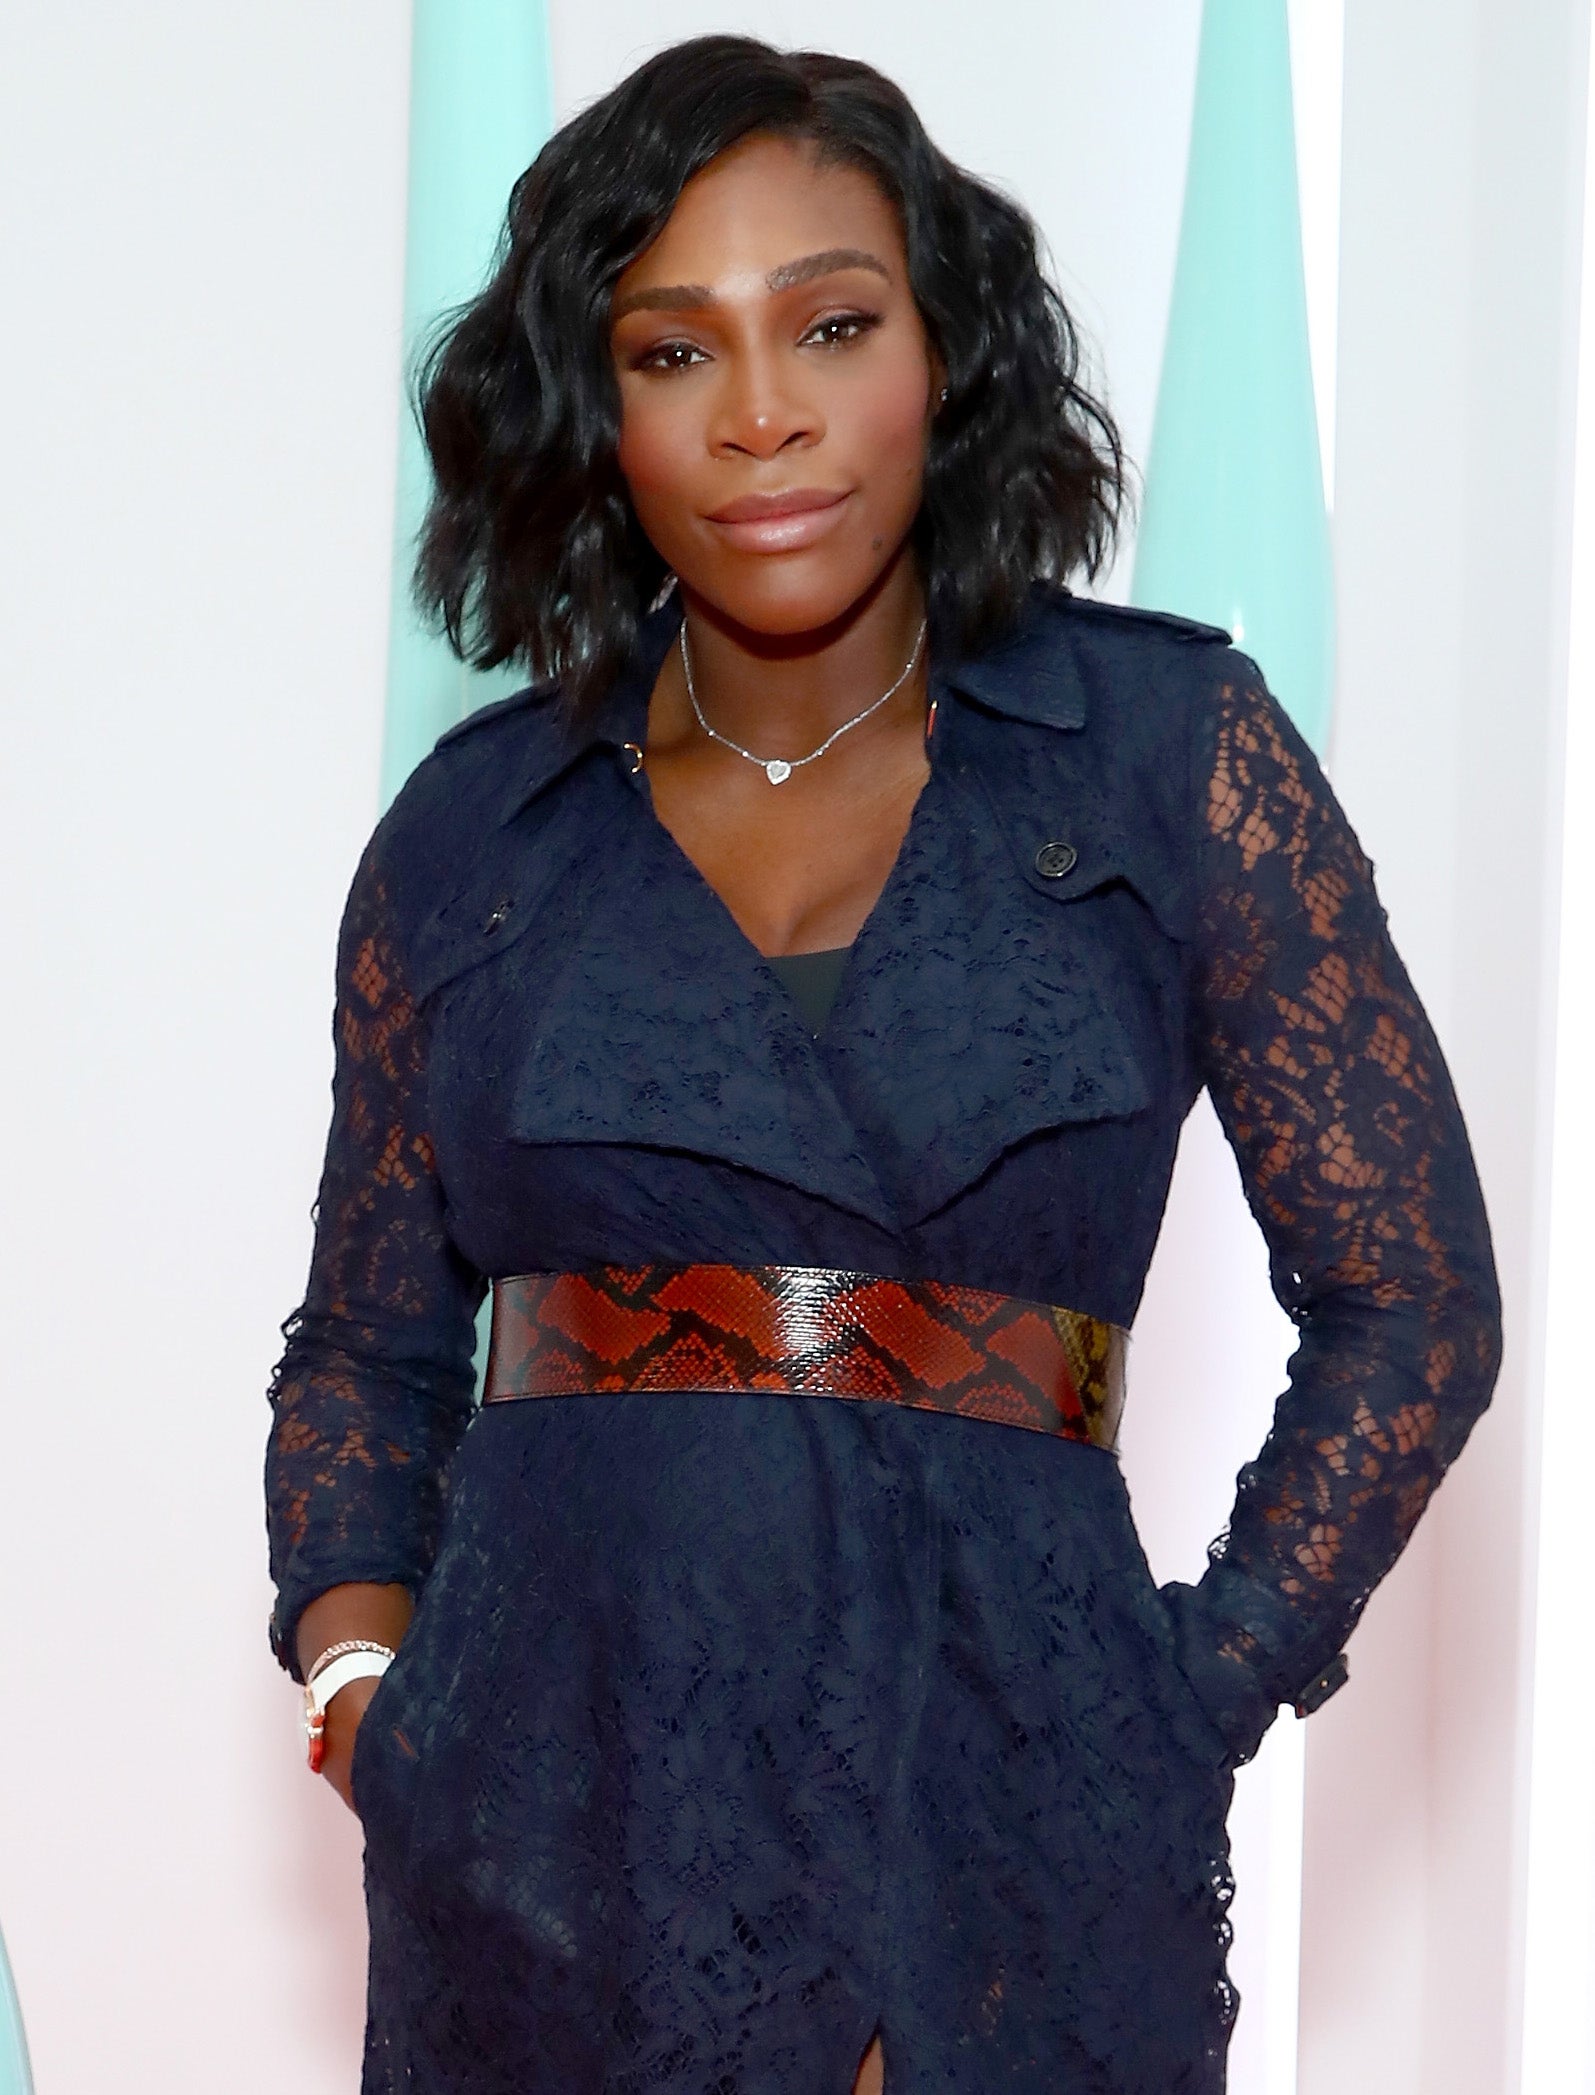 Serena Williams Bares Baby Bump On Cover Of ‘Vanity Fair’
